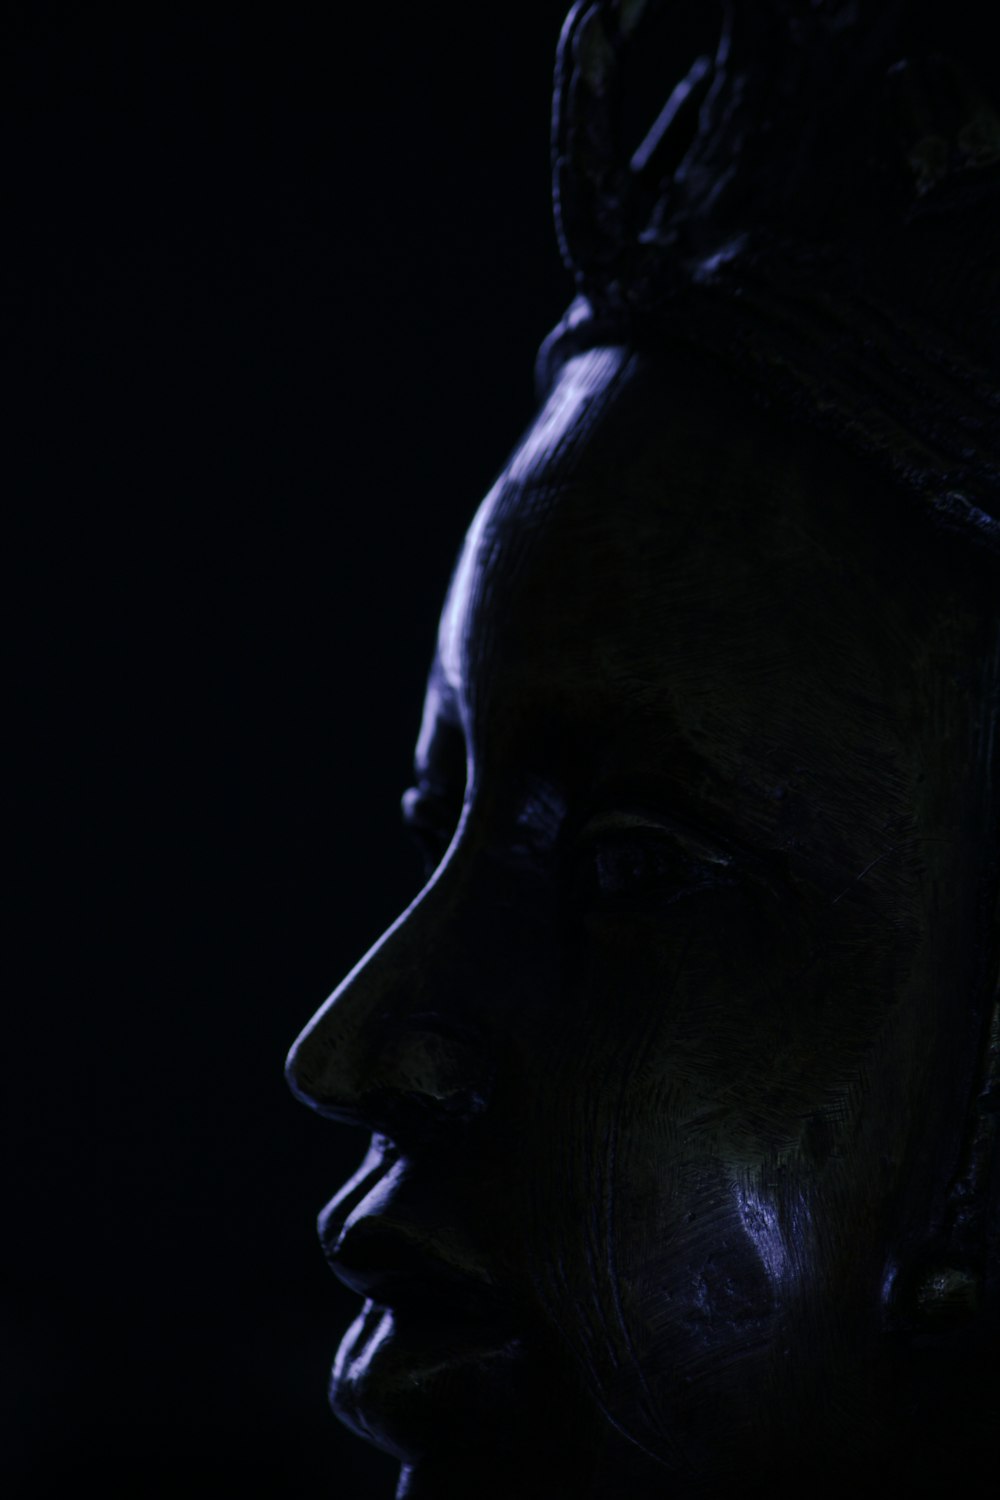 a close up of a statue of a person